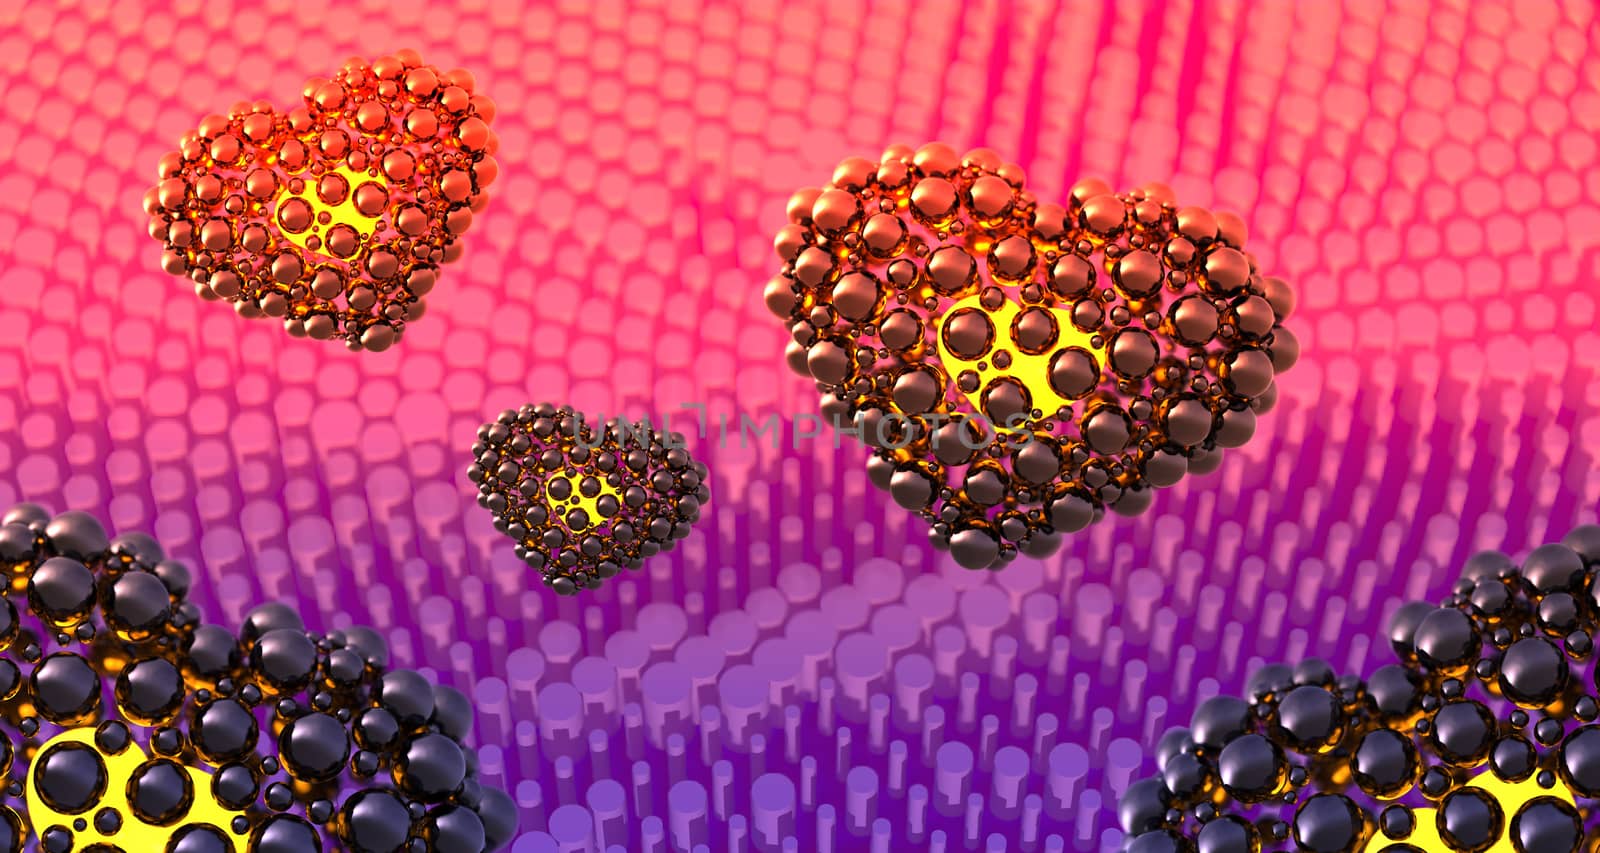 black hearts made of spheres with reflections and flying over cylindrical abstract bacground. Happy valentines day 3d illustration.